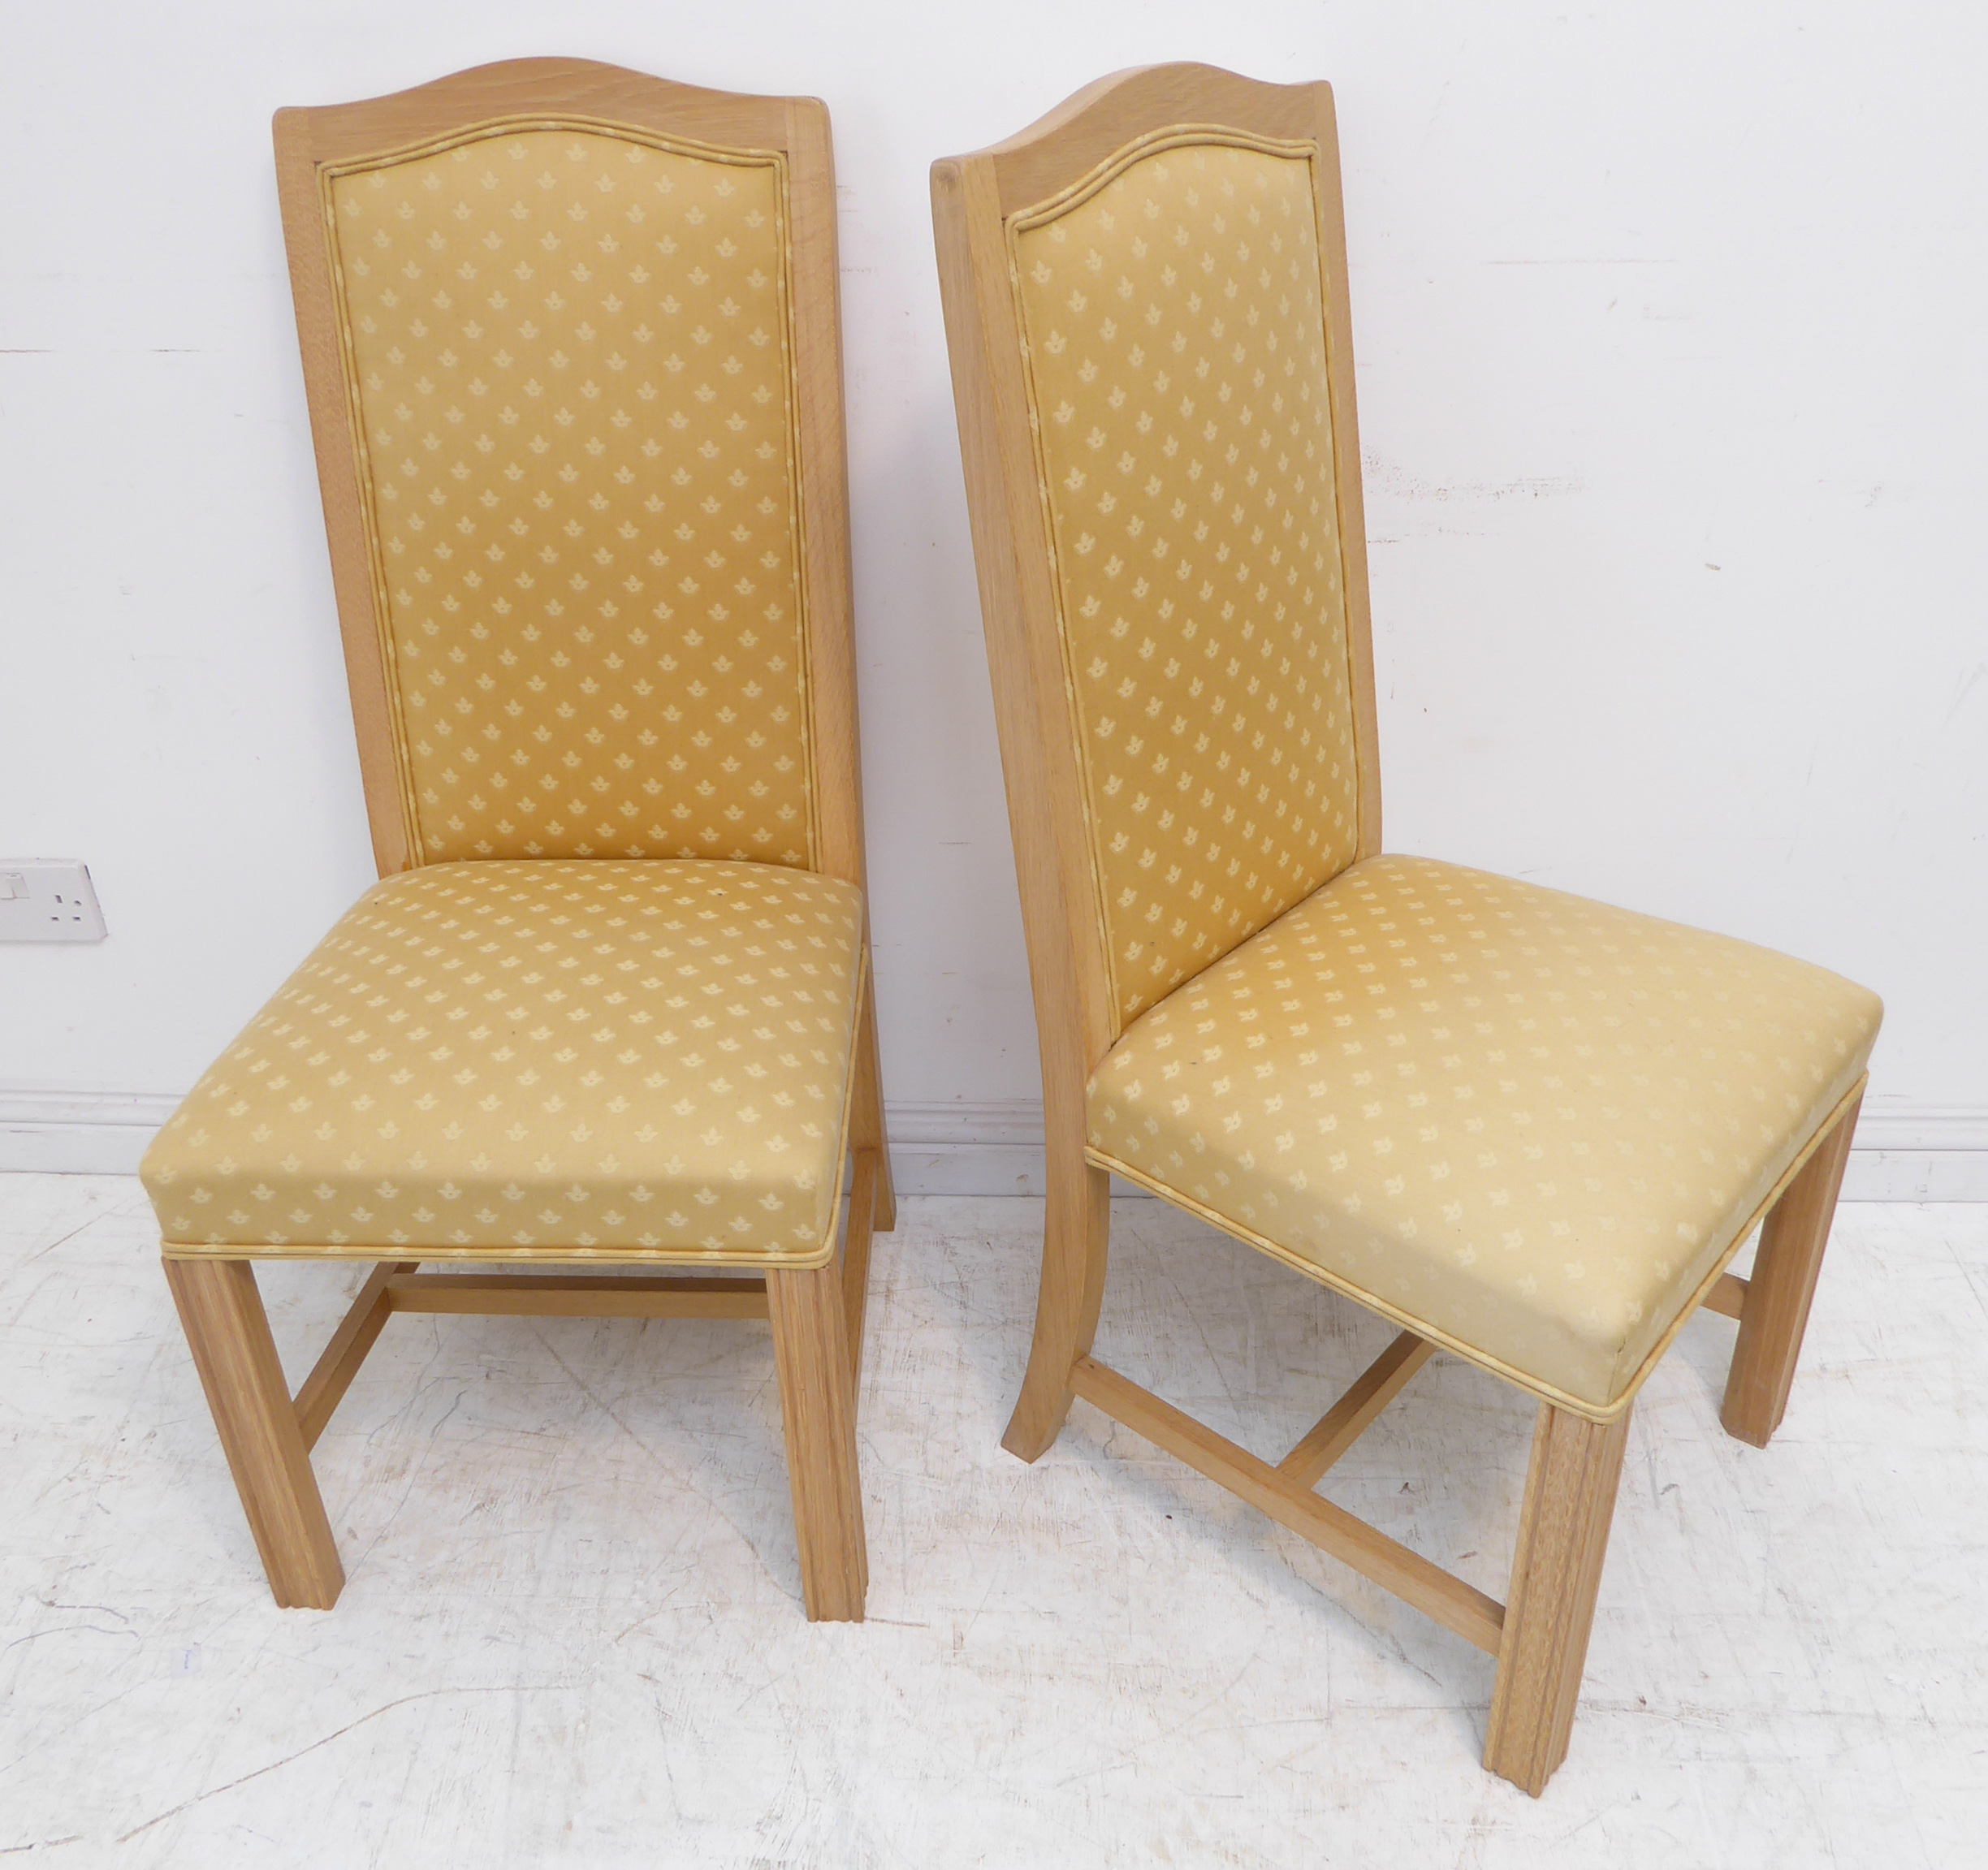 A pair of modern light oak and gold upholstered side chairs with square fluted front legs